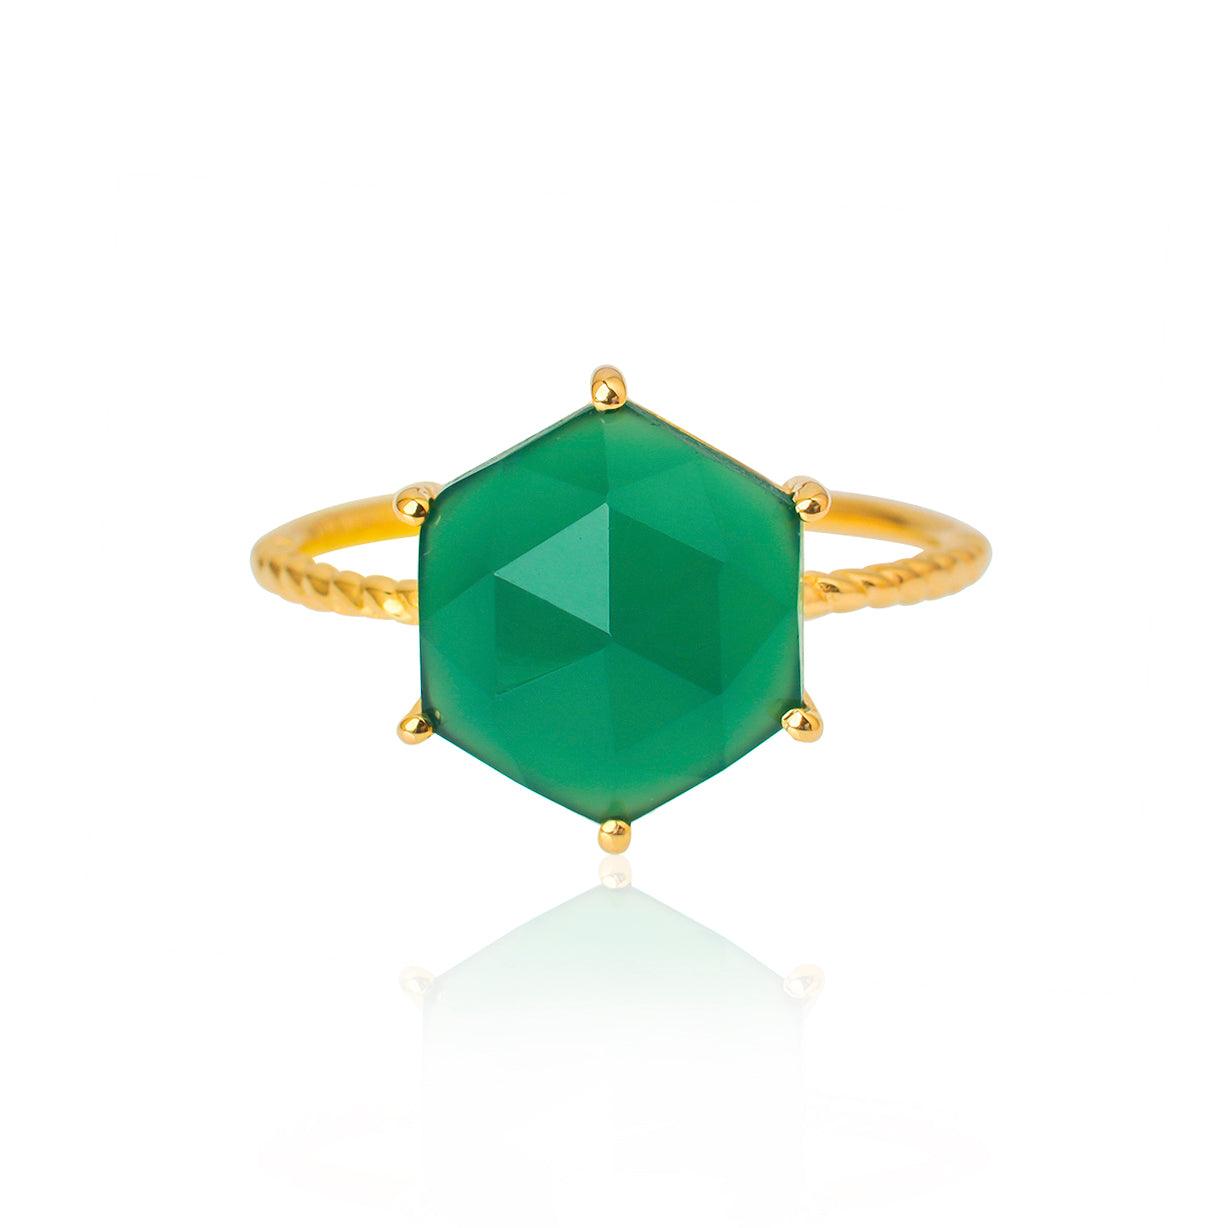 Green Onyx Solitaire Ring Gold Over 925 Sterling Silver jewelry - YoTreasure